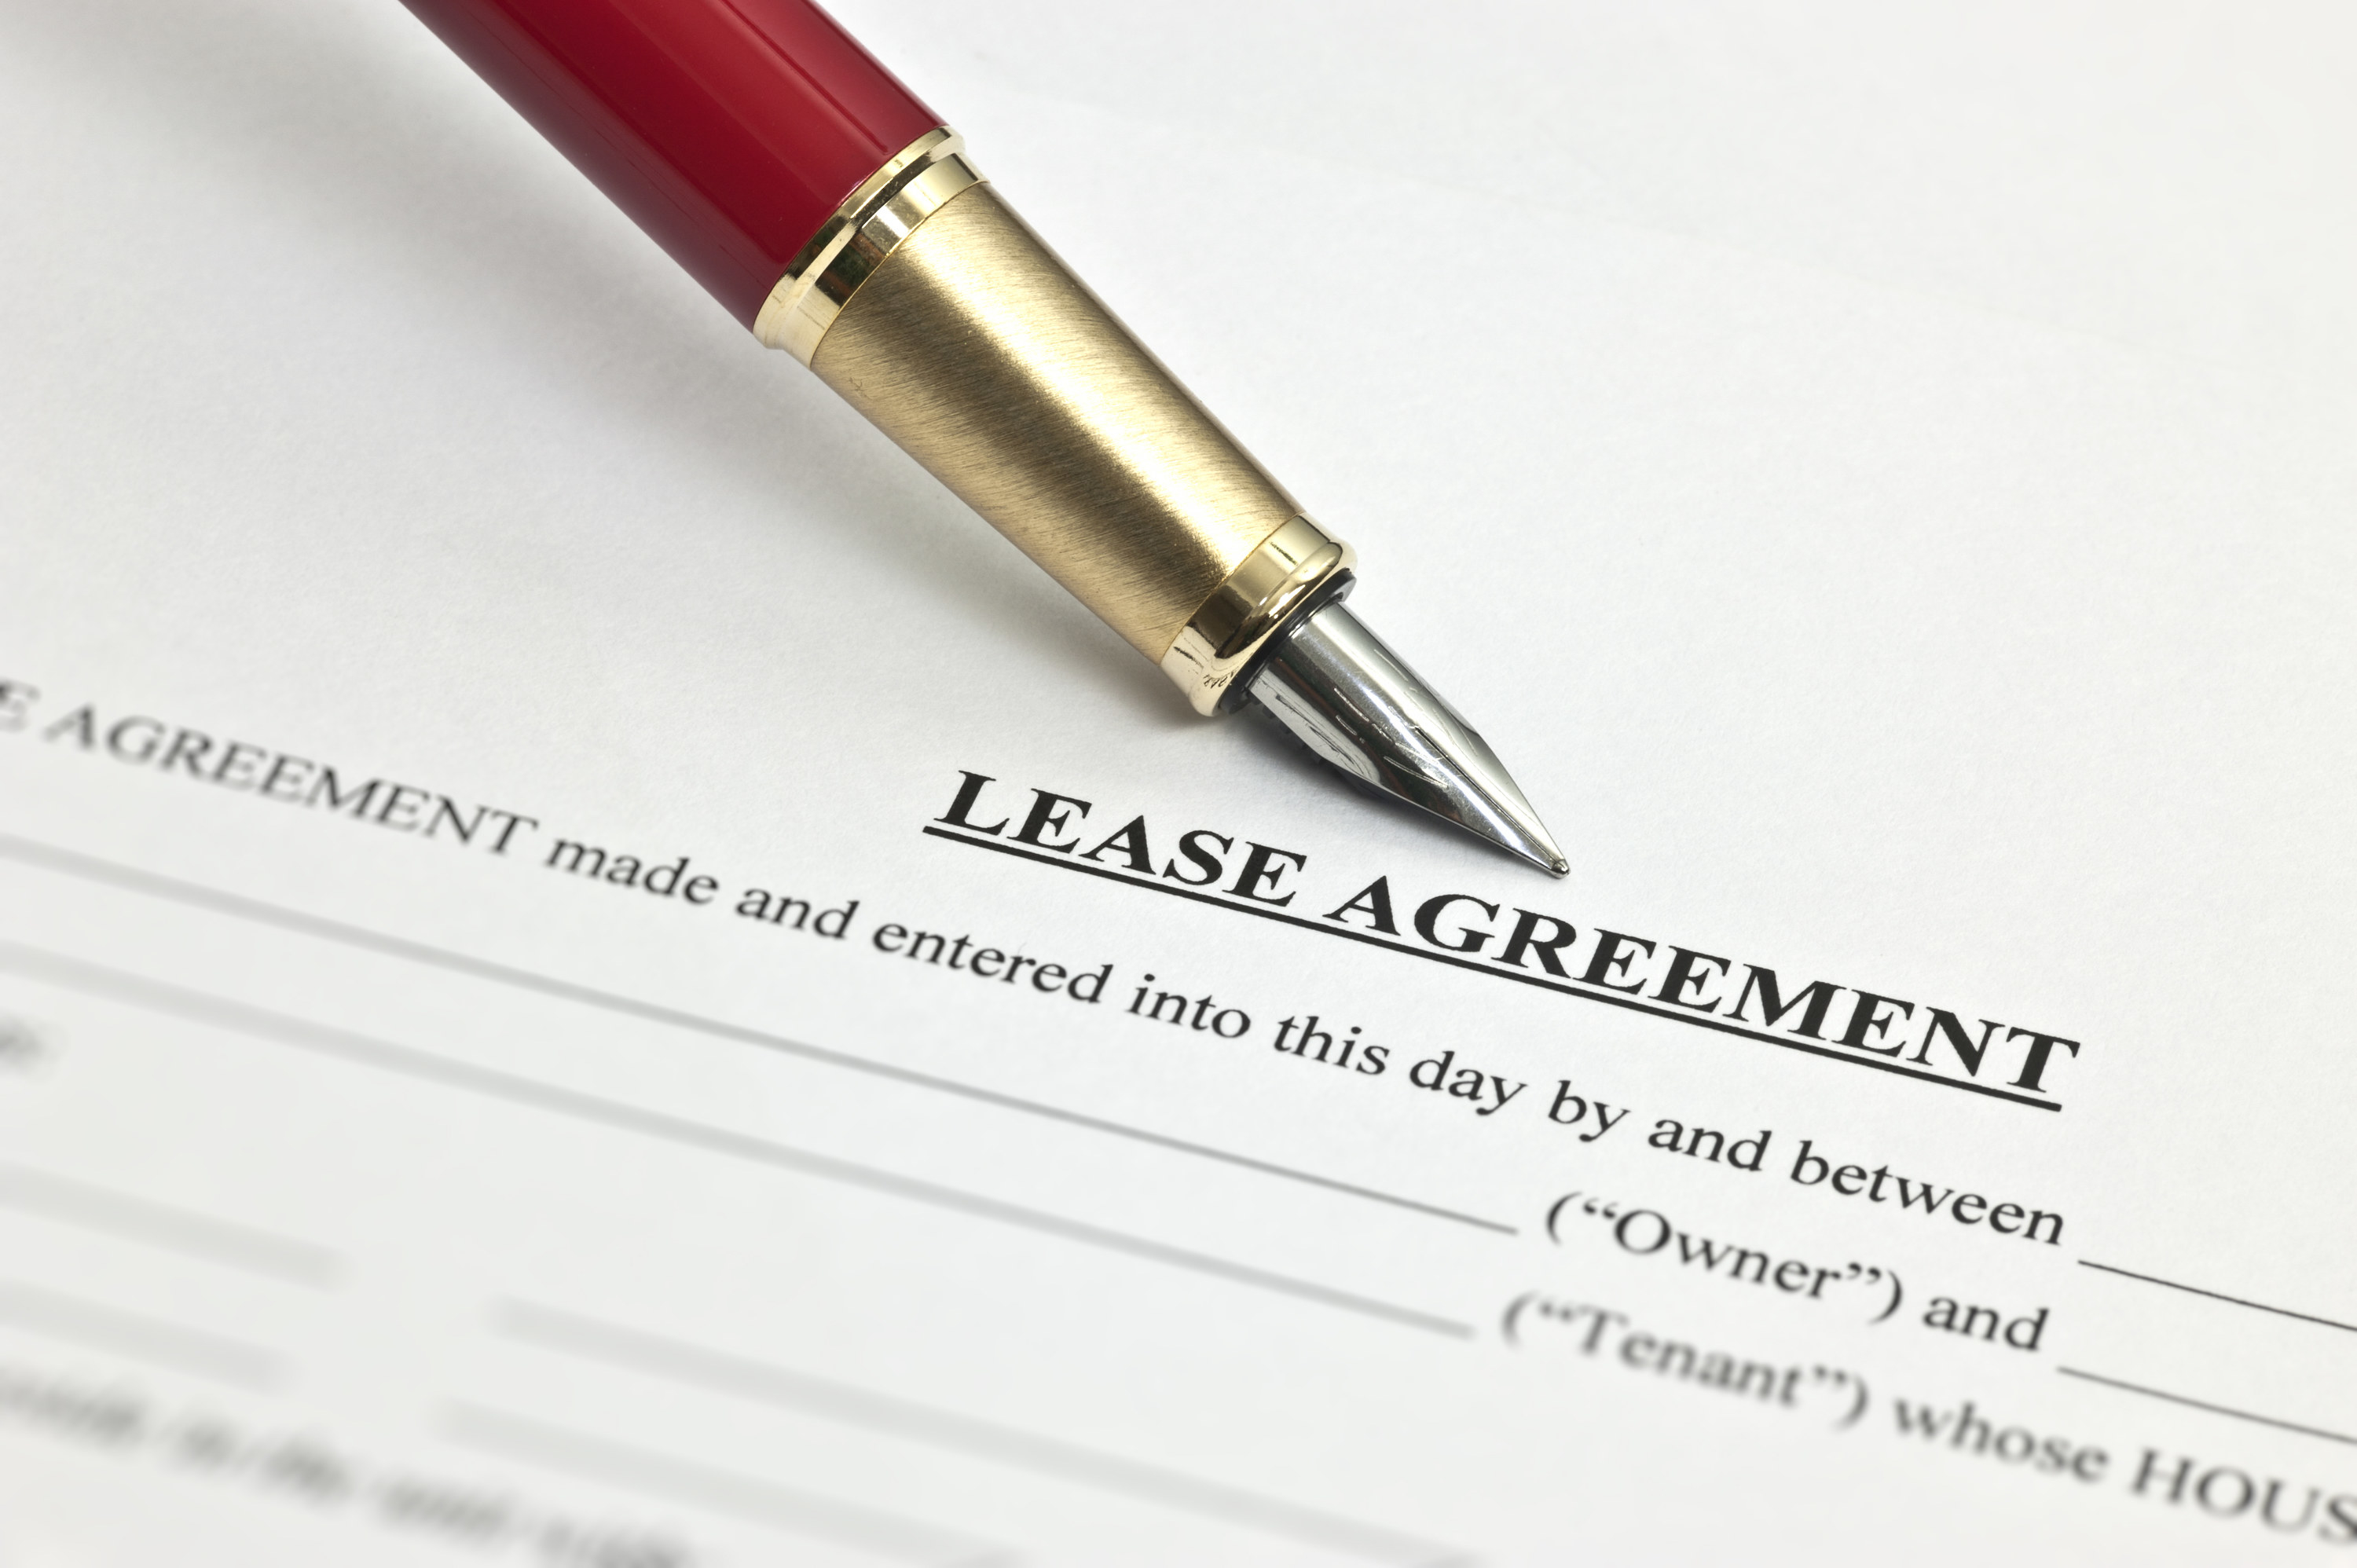 a lease agreement paper with a pen